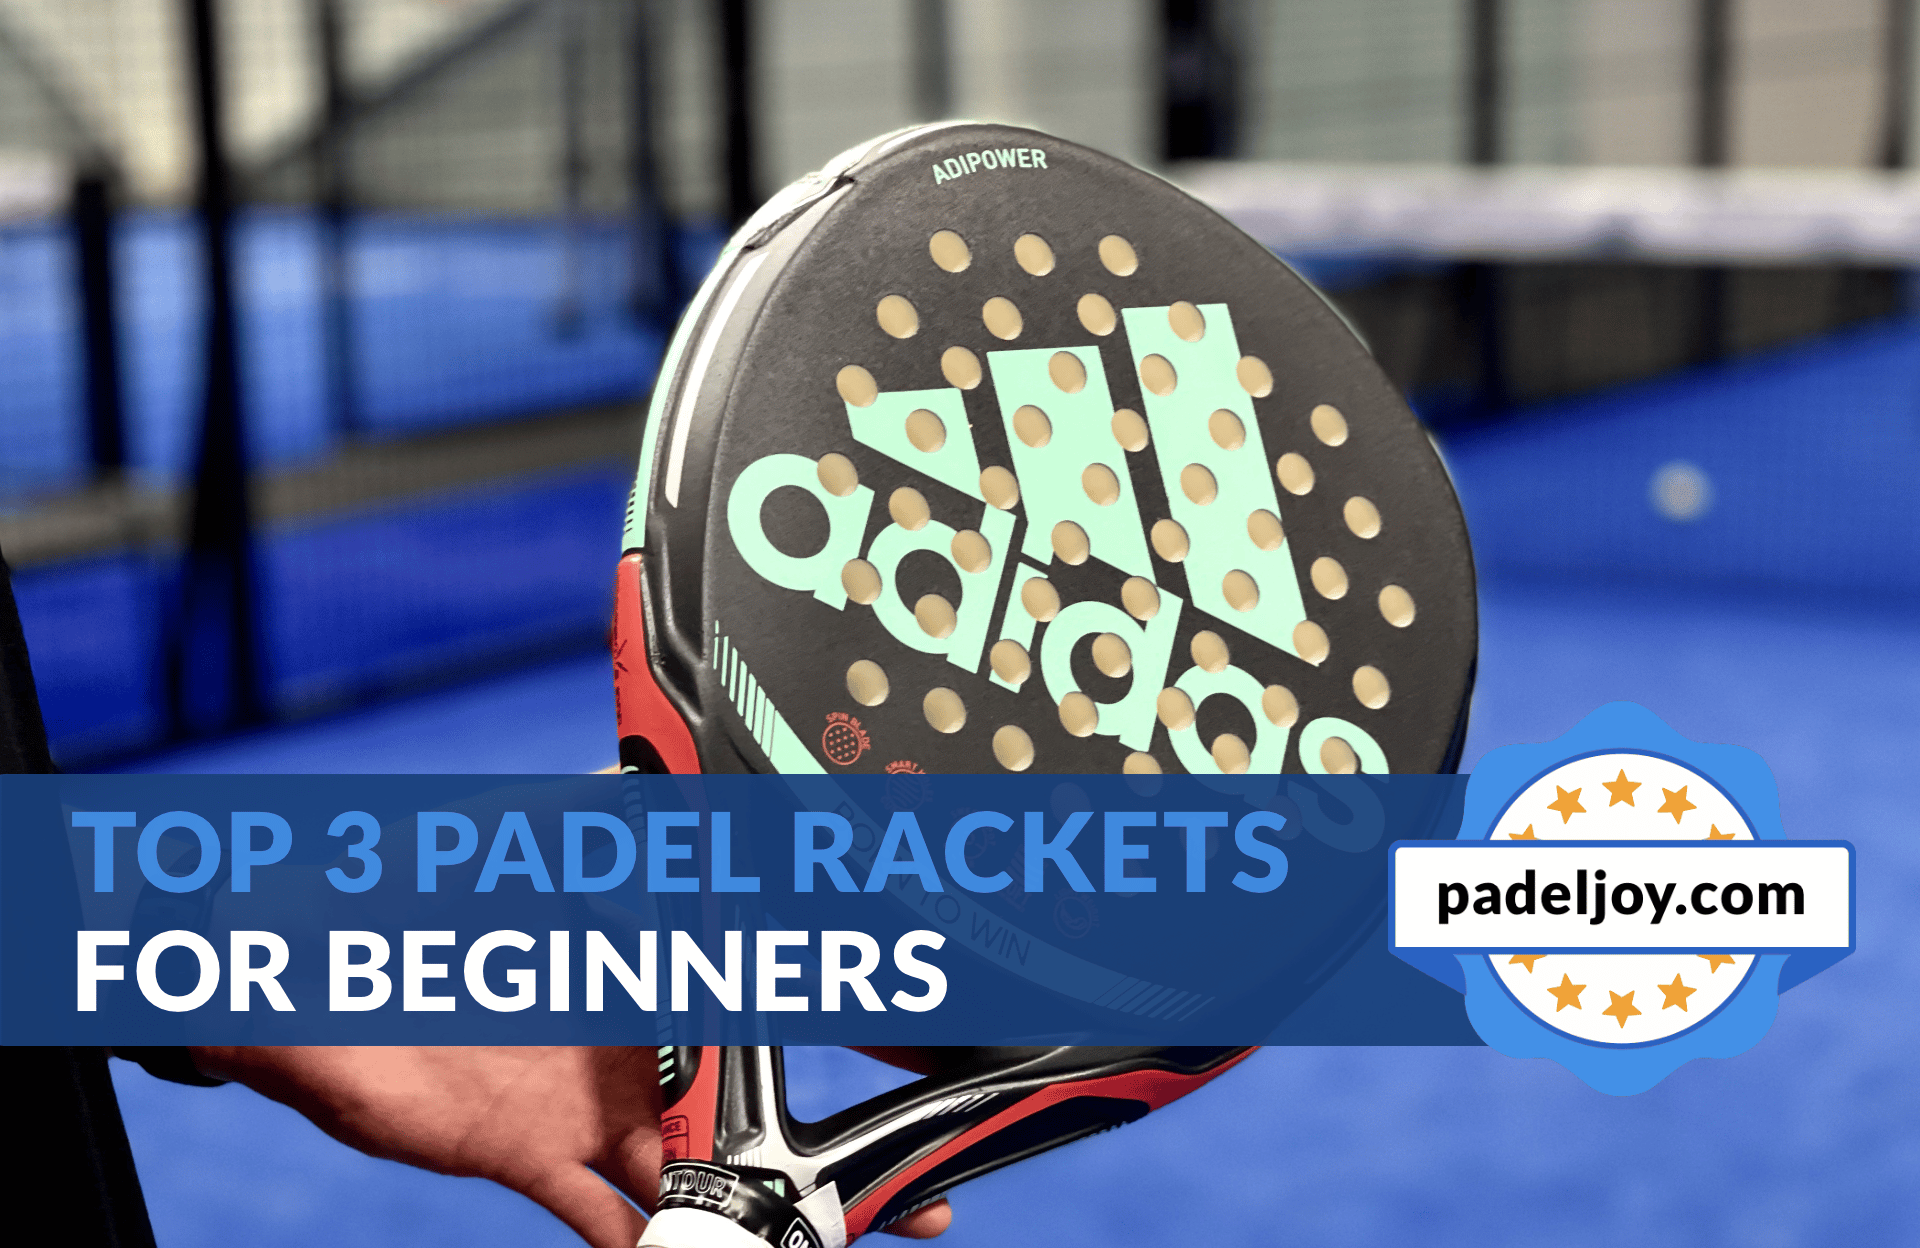 Best Padel Rackets For Beginners: Top Picks for New Players (2022)